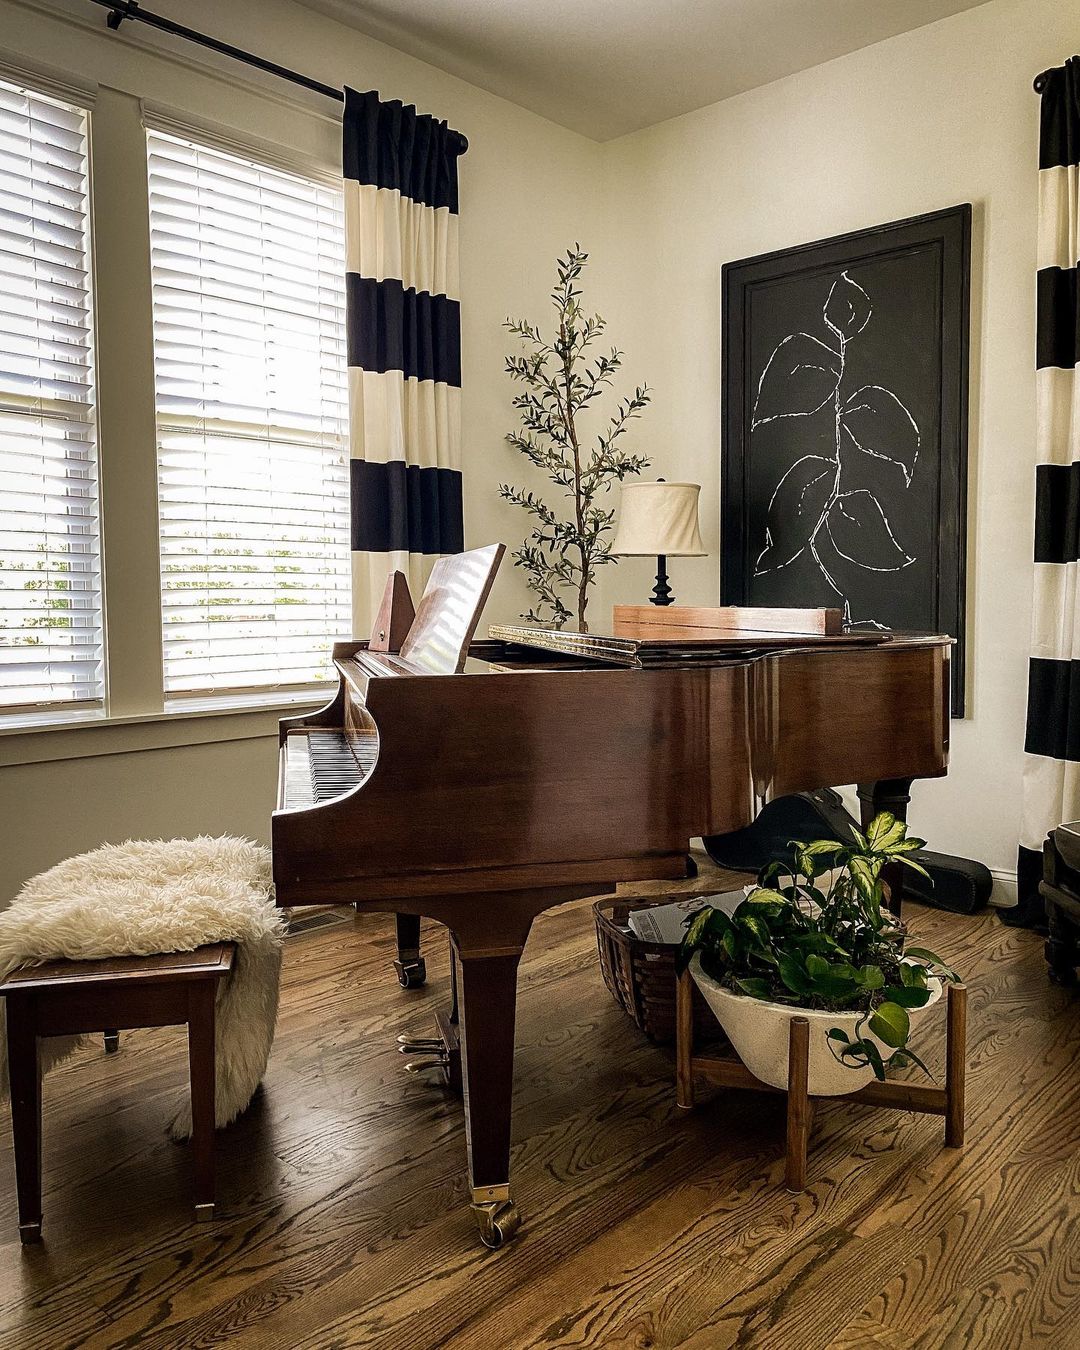 Small Music Room Set Up with a Piano. Photo by Instagram user @downtoearth.style